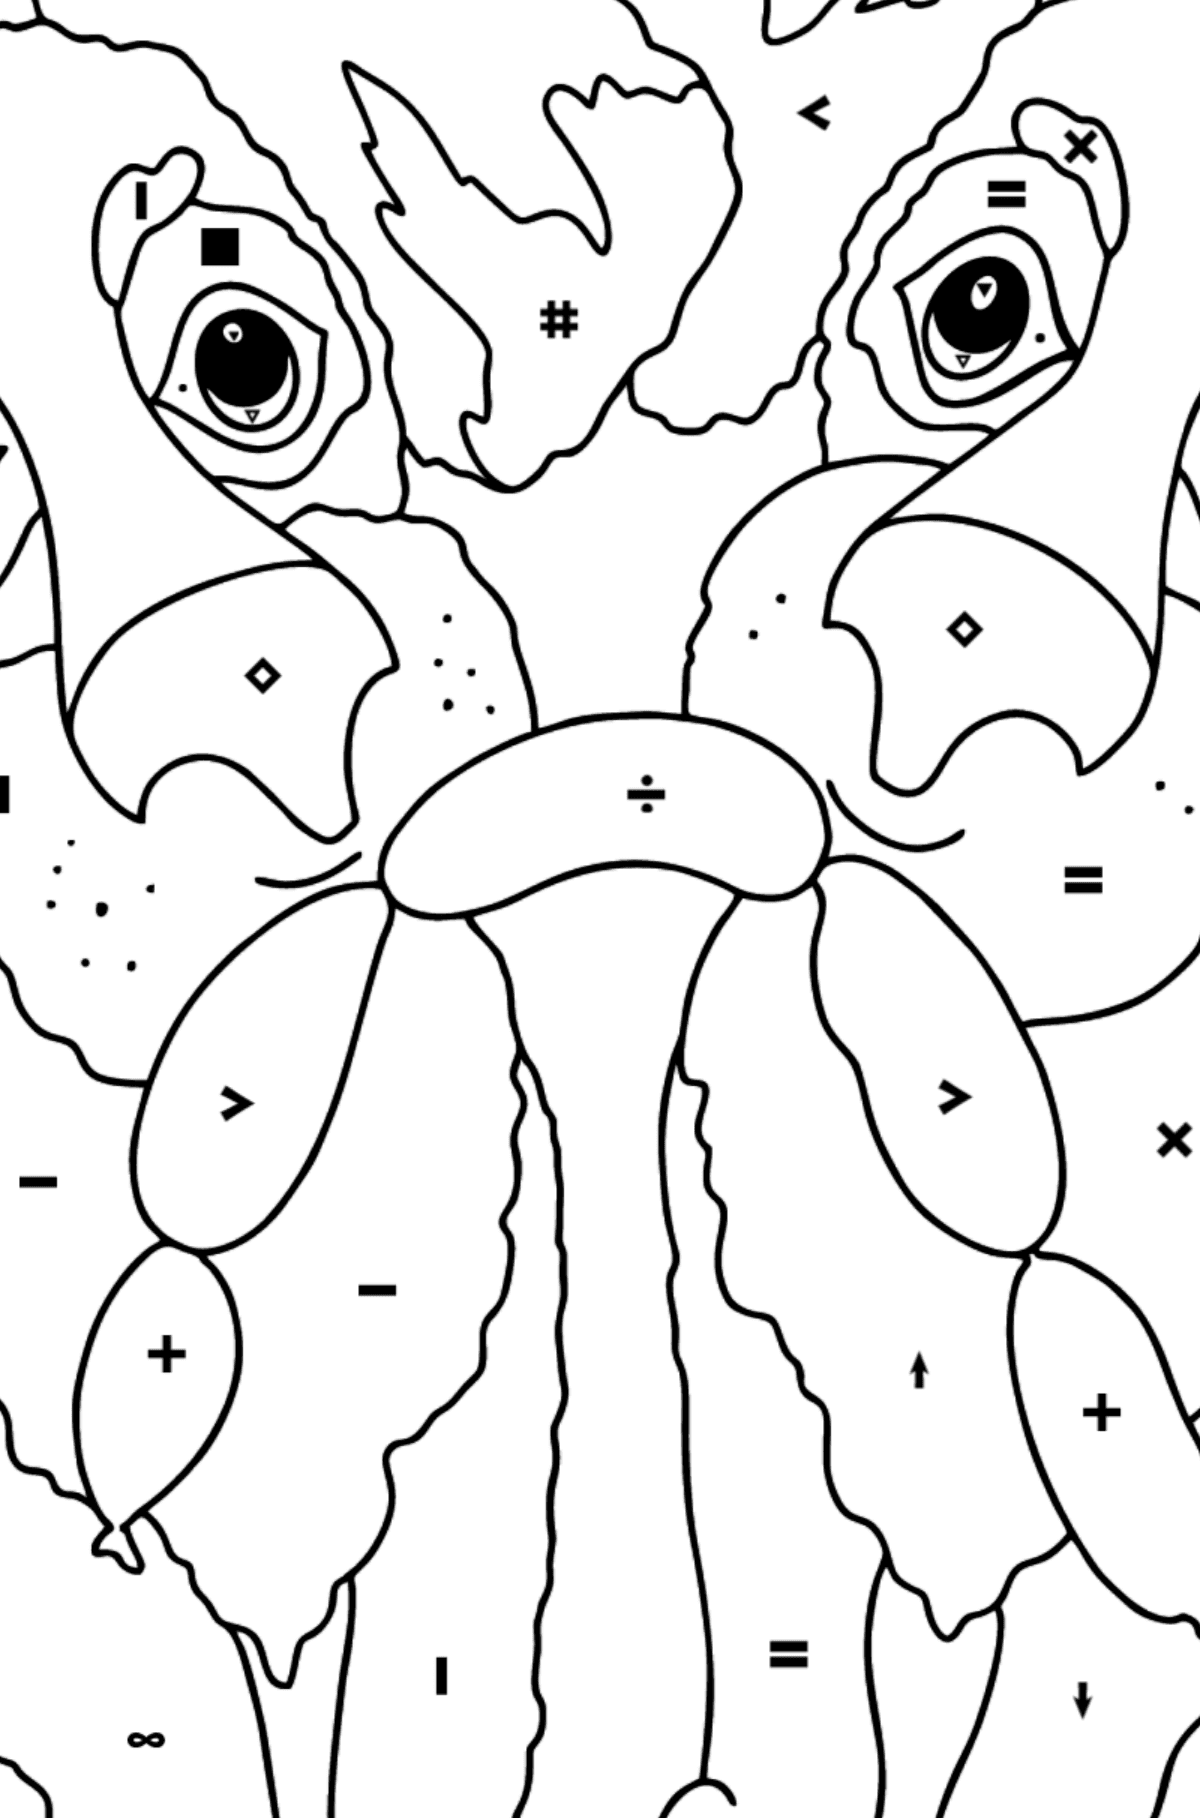 Coloring Page - Dogs Found Sausages - Coloring by Symbols for Kids